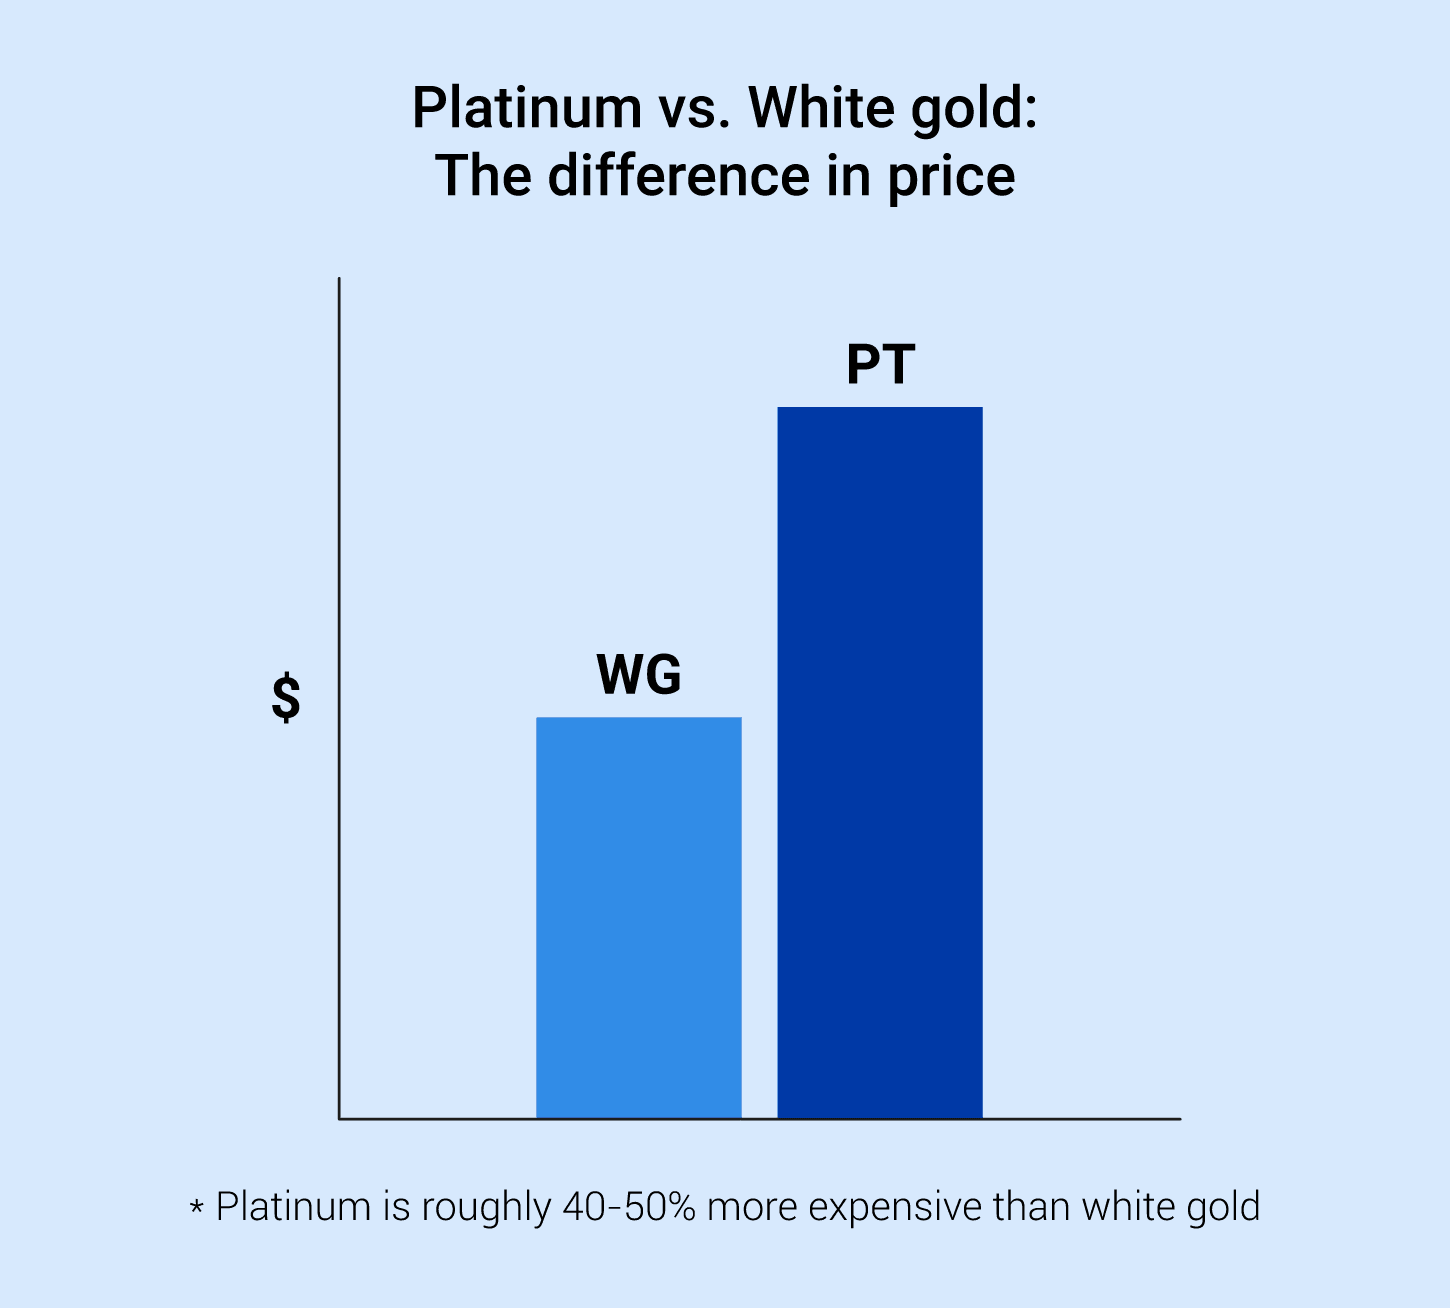 The price difference between platinum nad white gold